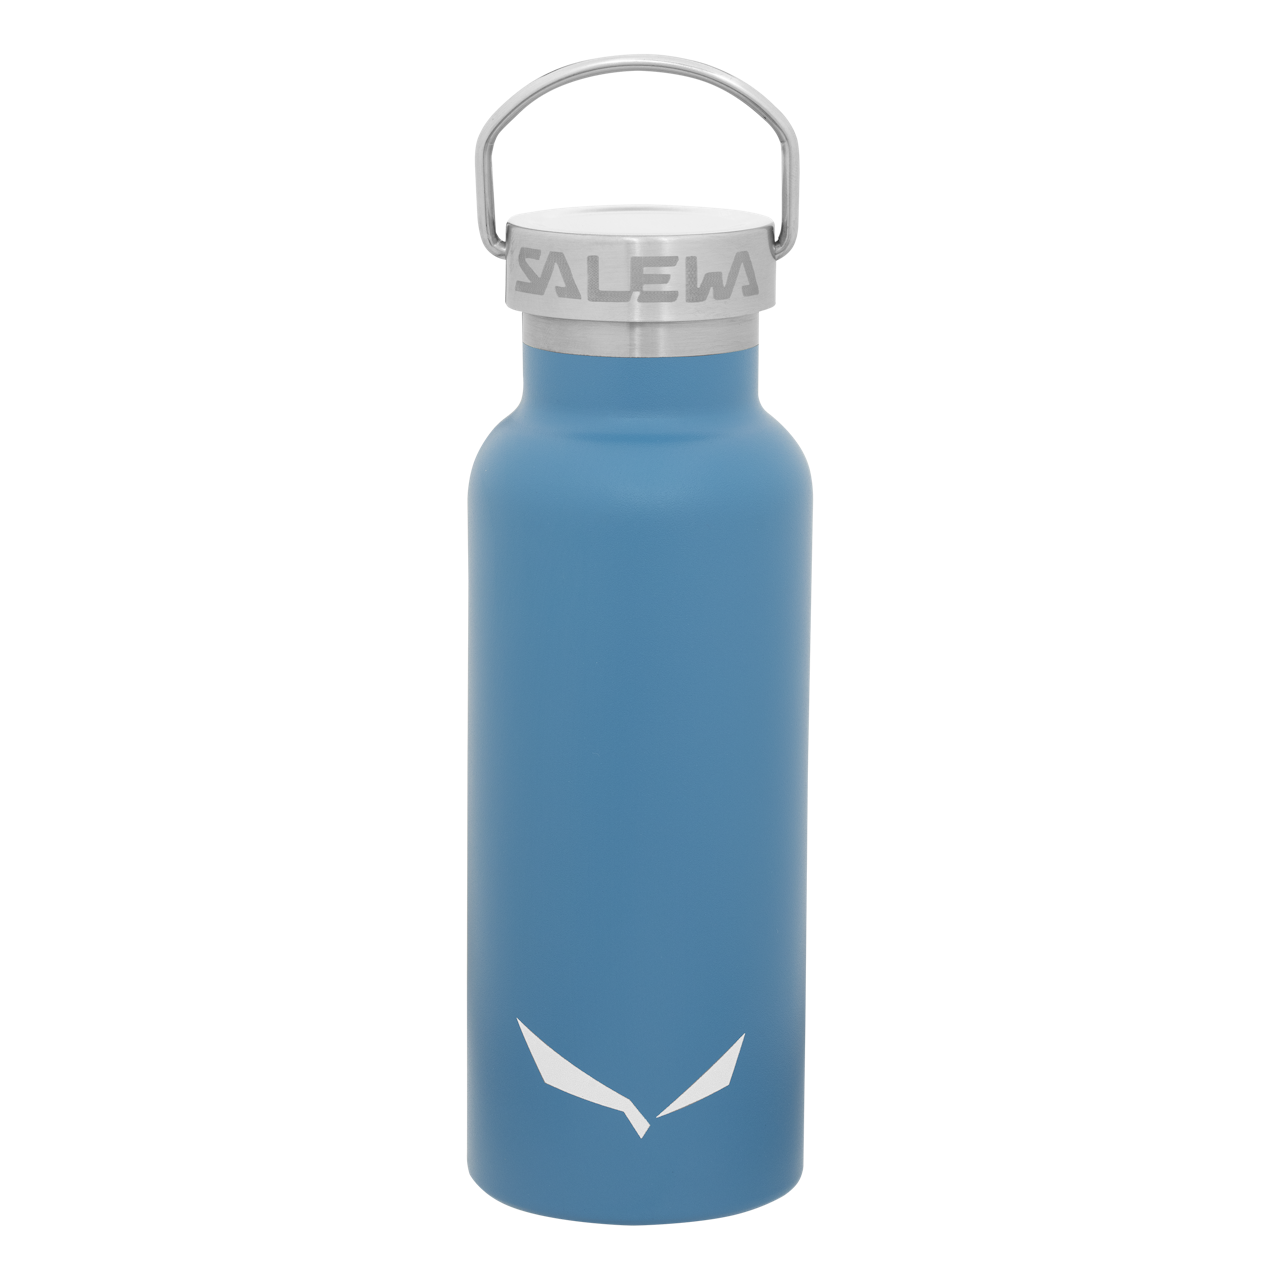 VALSURA INSULATED STAINLESS STEEL 0,45L BOTTLE